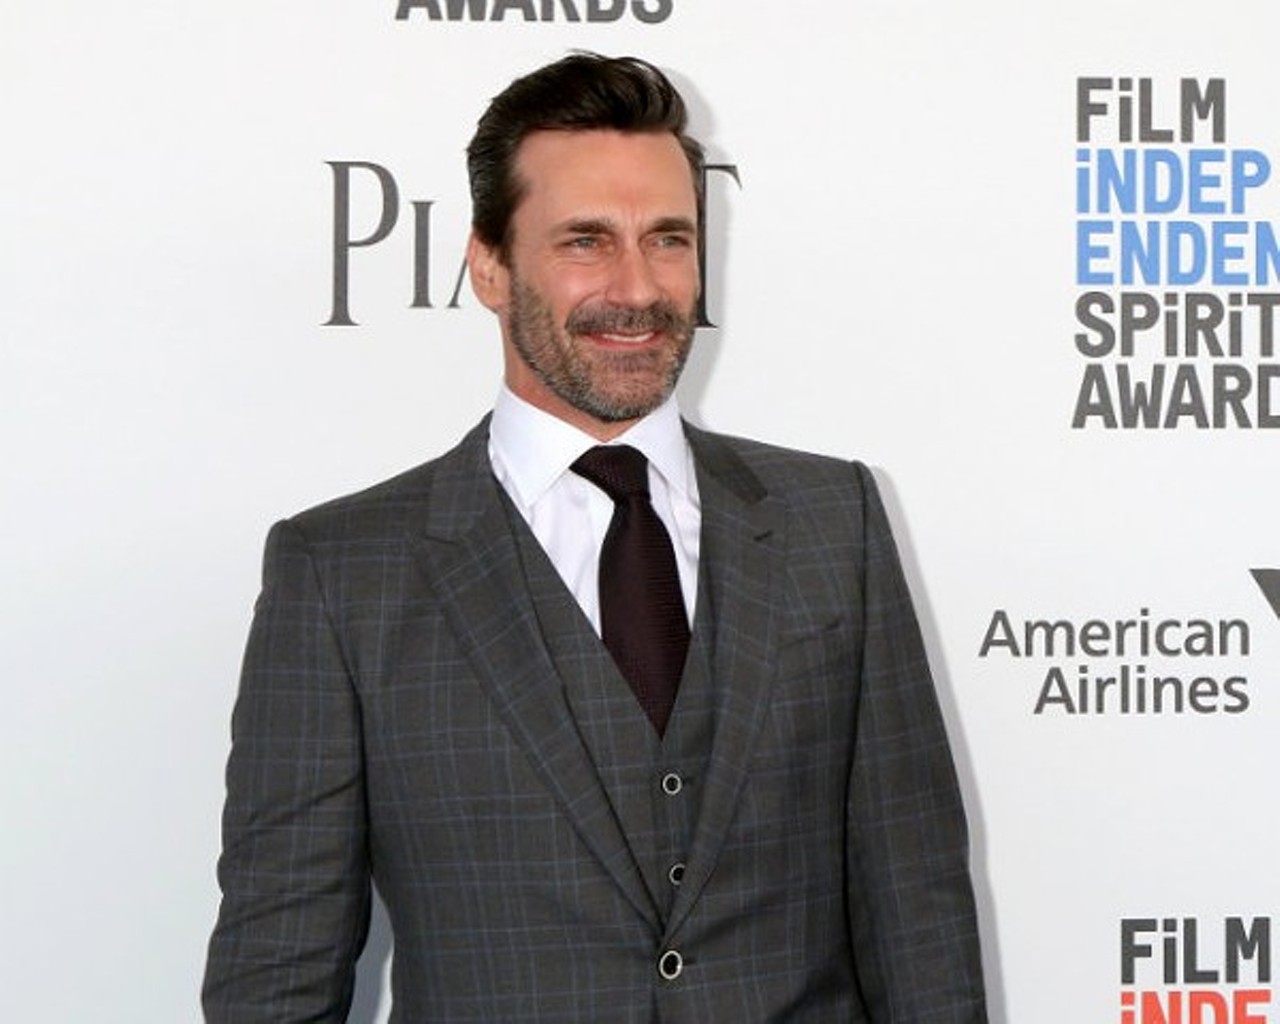 "Some lucky St. Louis kids actually had Jon Hamm as a teacher."
John Burroughs School, 755 S. Price Rd., Ladue
"Here is where Jon Hamm used to teach -- and Ellie Kemper was his student."
Photo courtesy of Kathy Hutchins / Shutterstock